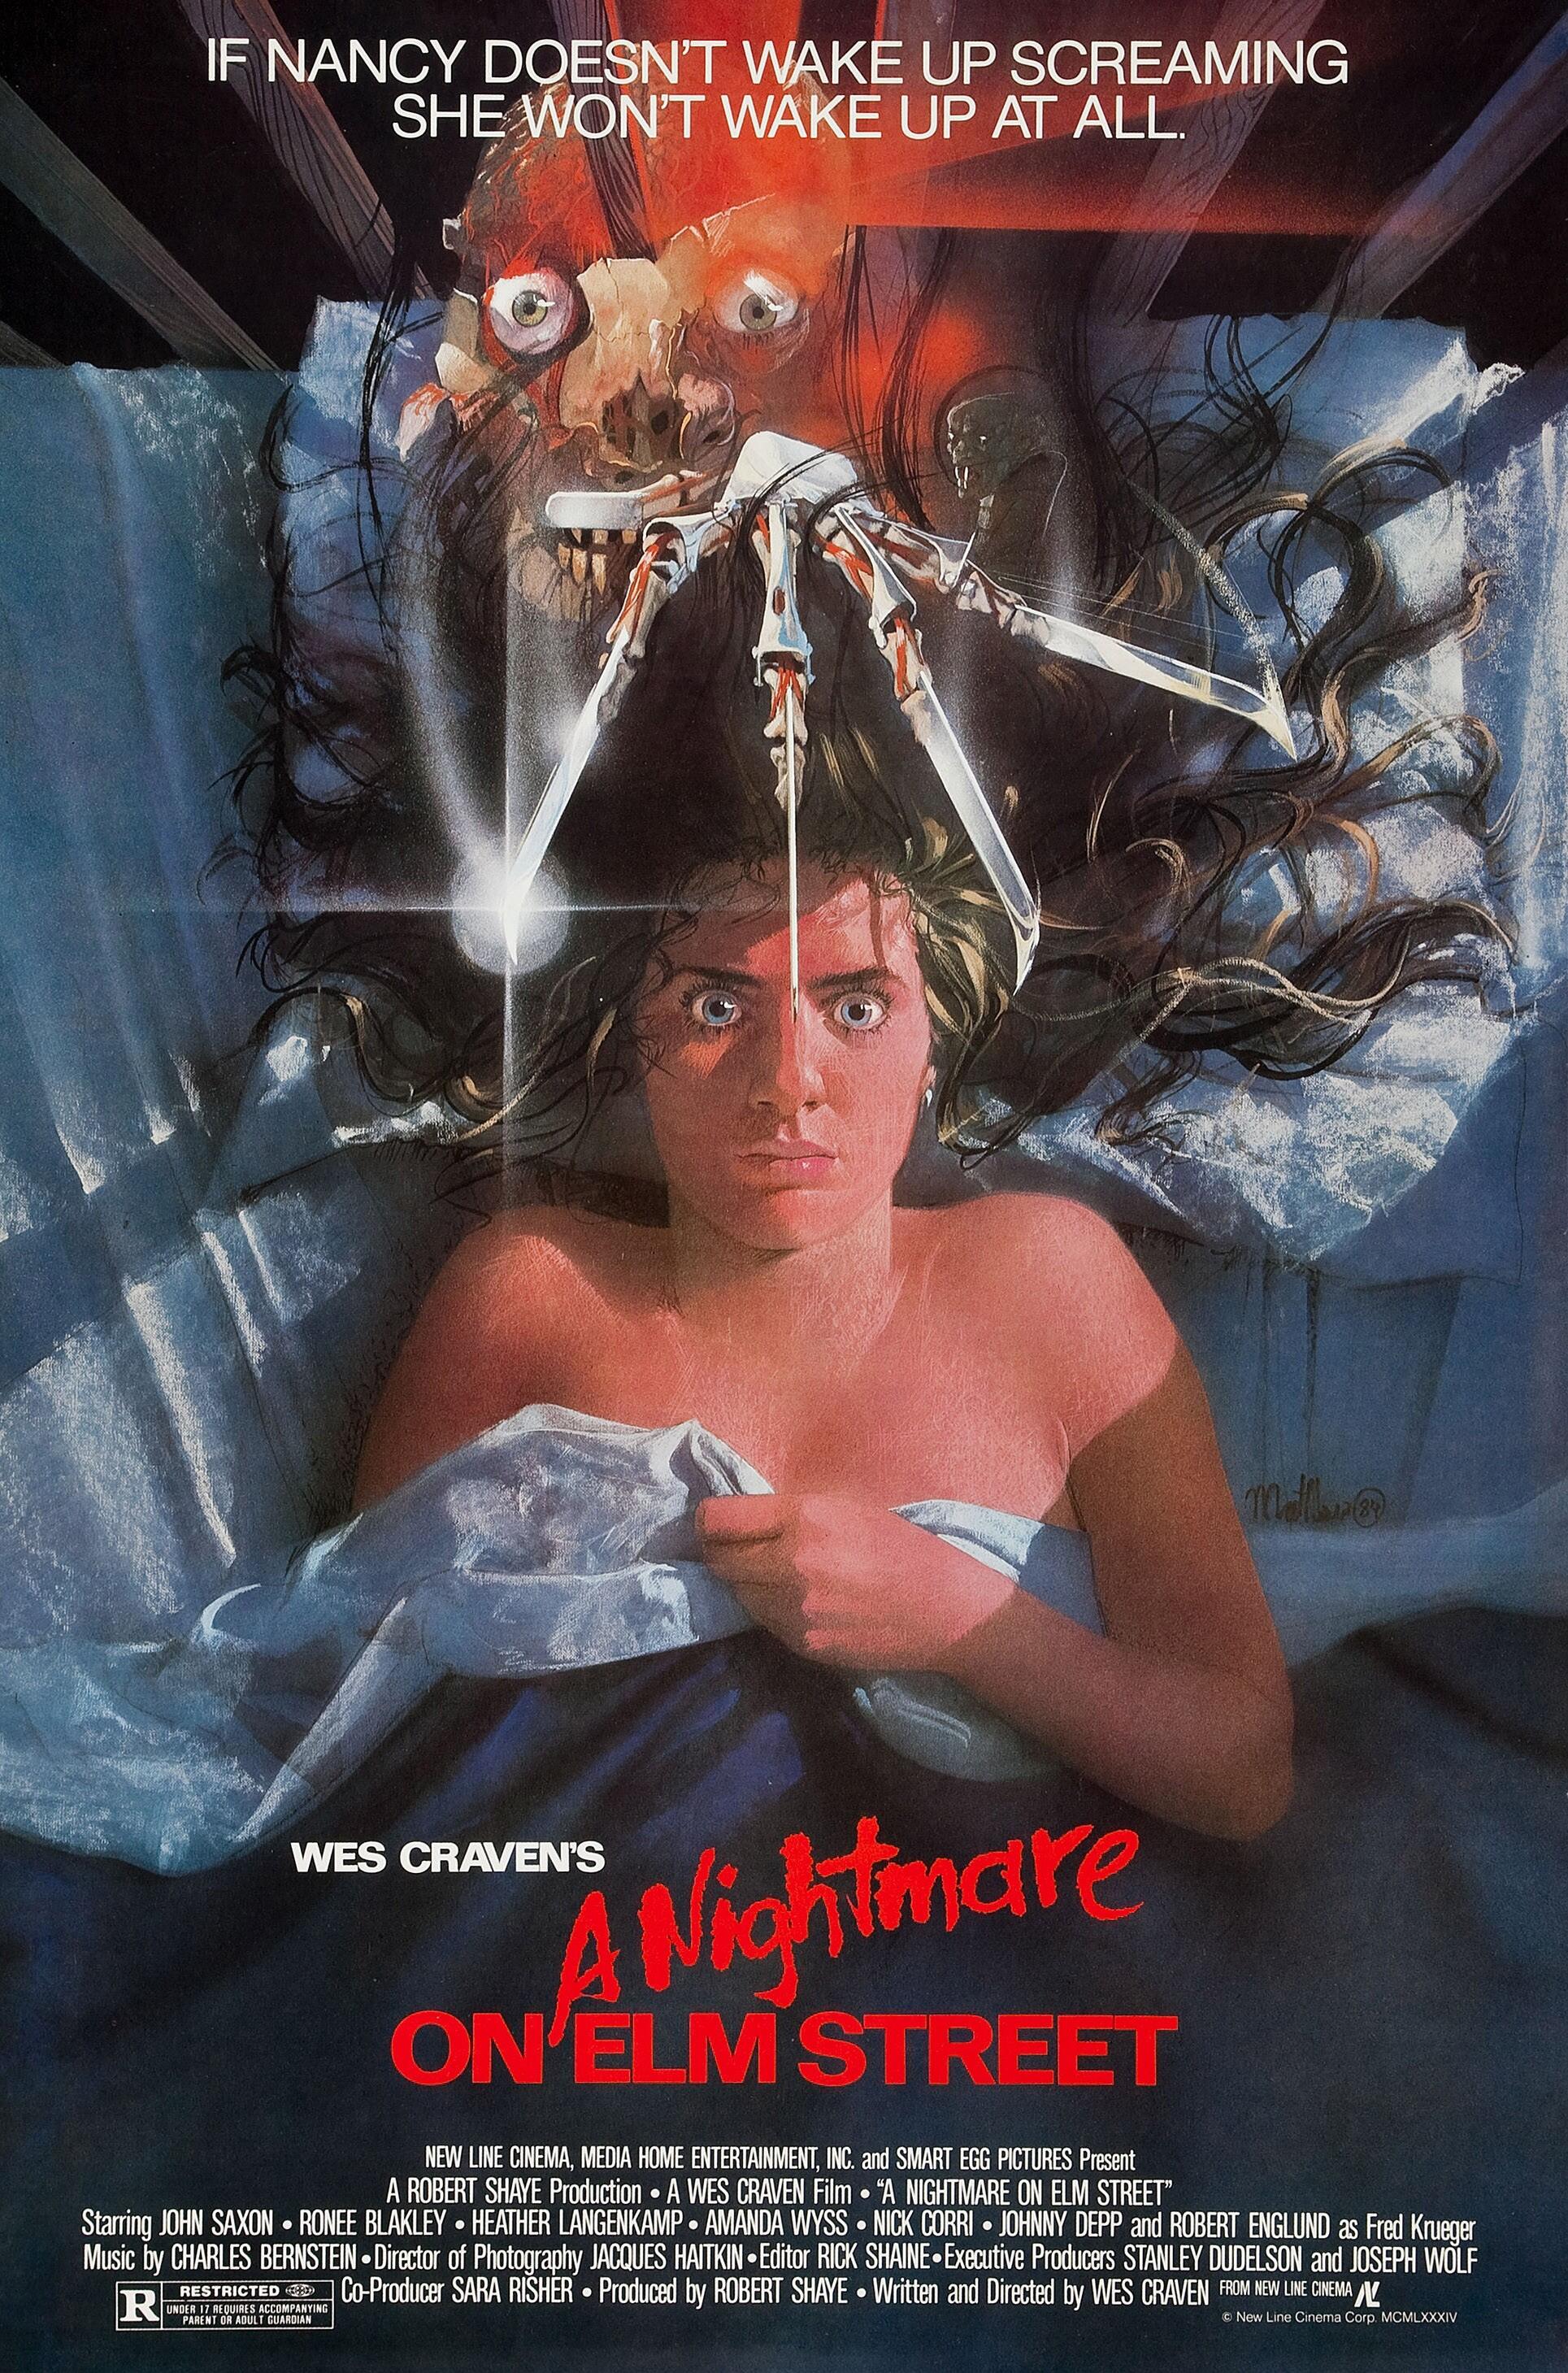 The Creepiest Movie Posters, Hands Down!